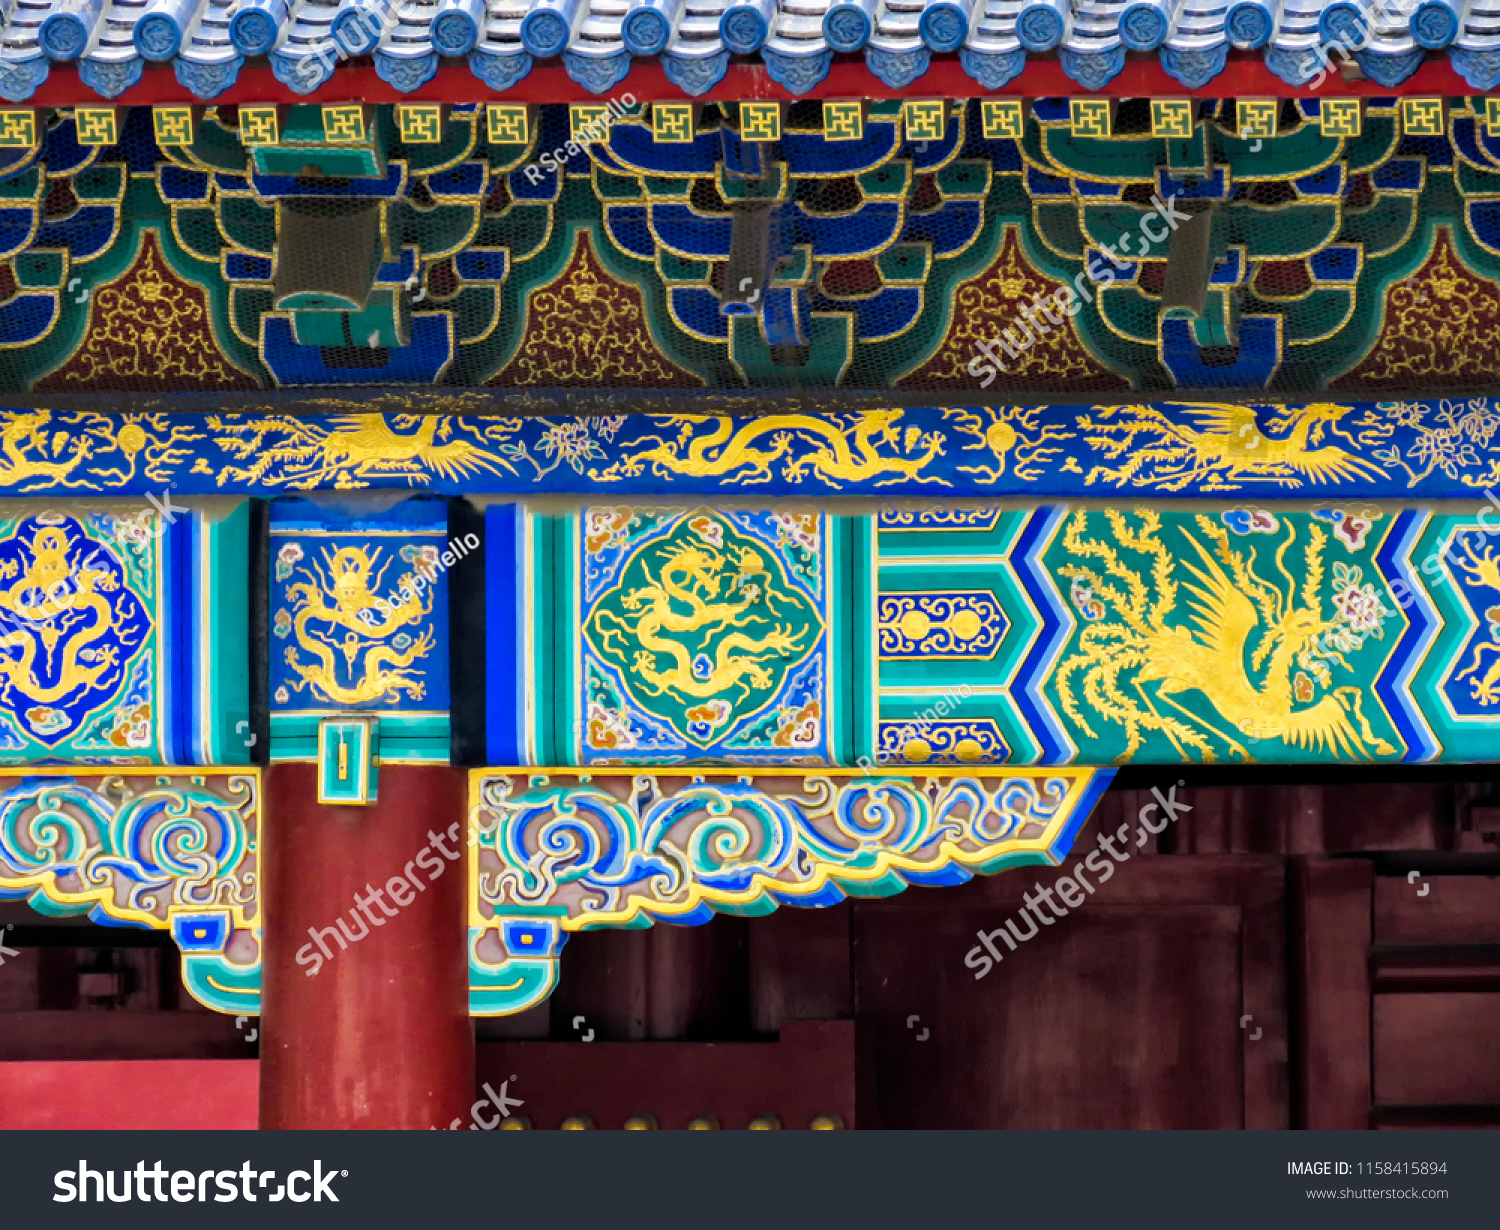 Temple of Heaven ornament in detail, Beijing, China, Asia #1158415894